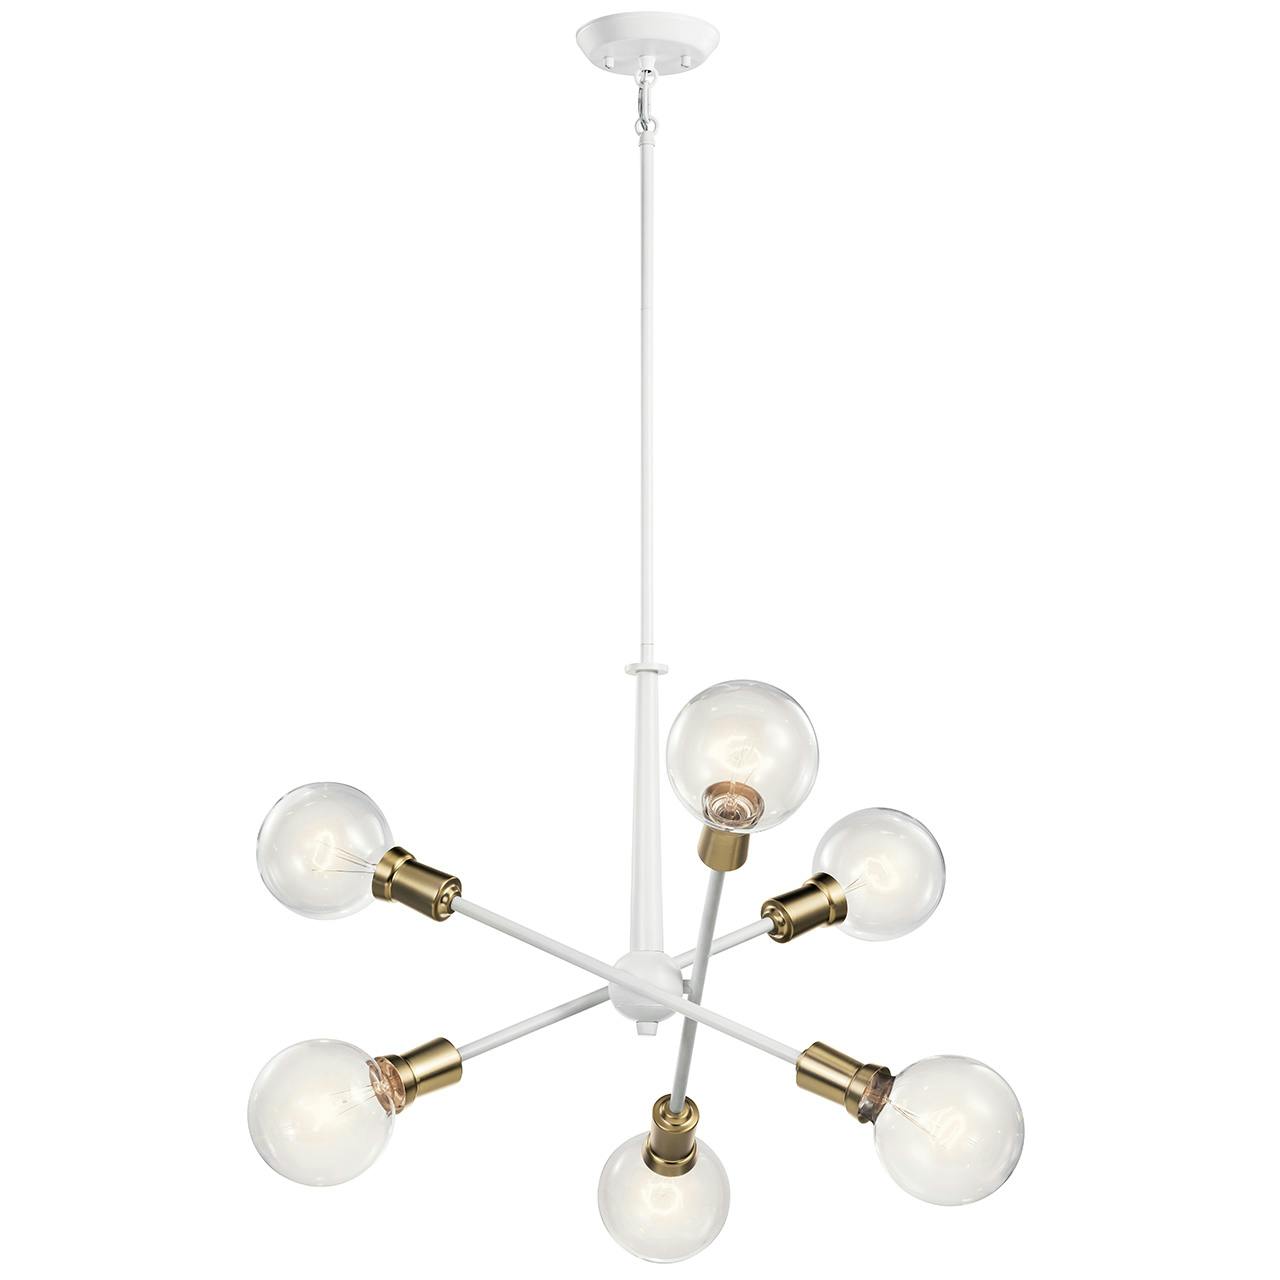 Armstrong 6 Light Chandelier White on a white background